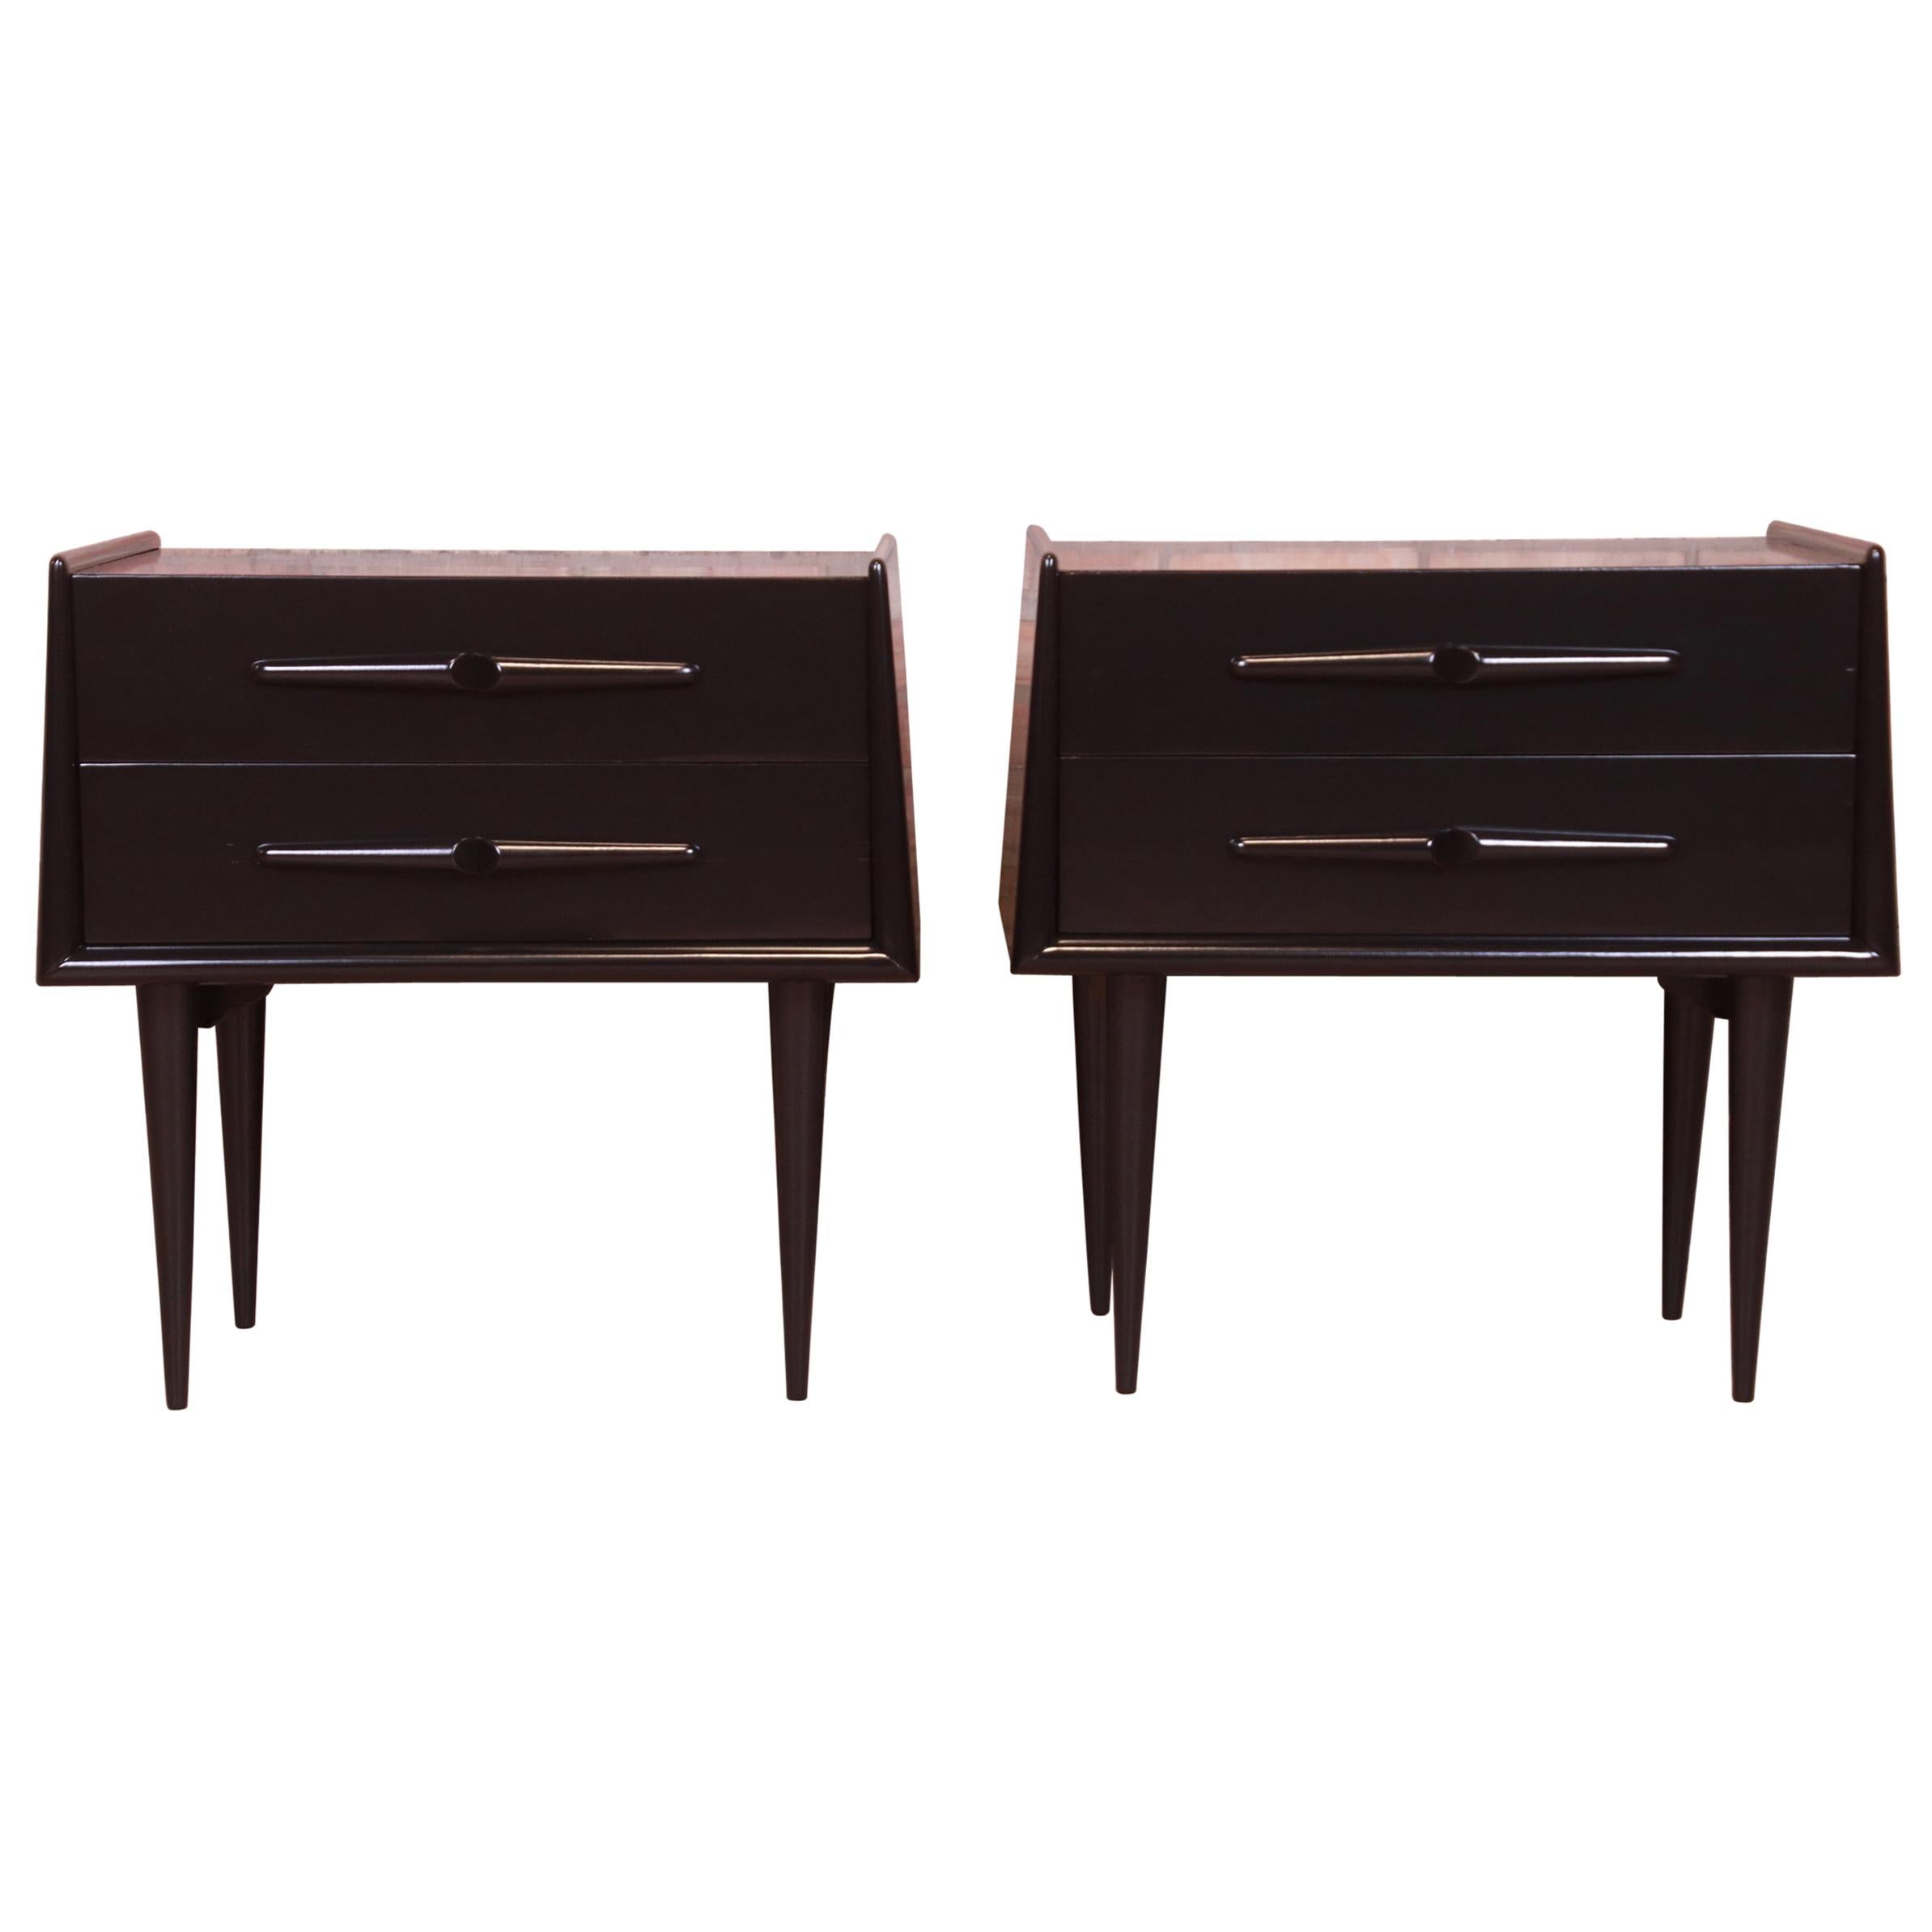 Edmond Spence Swedish Modern Black Lacquered Birch Nightstands, Newly Refinished